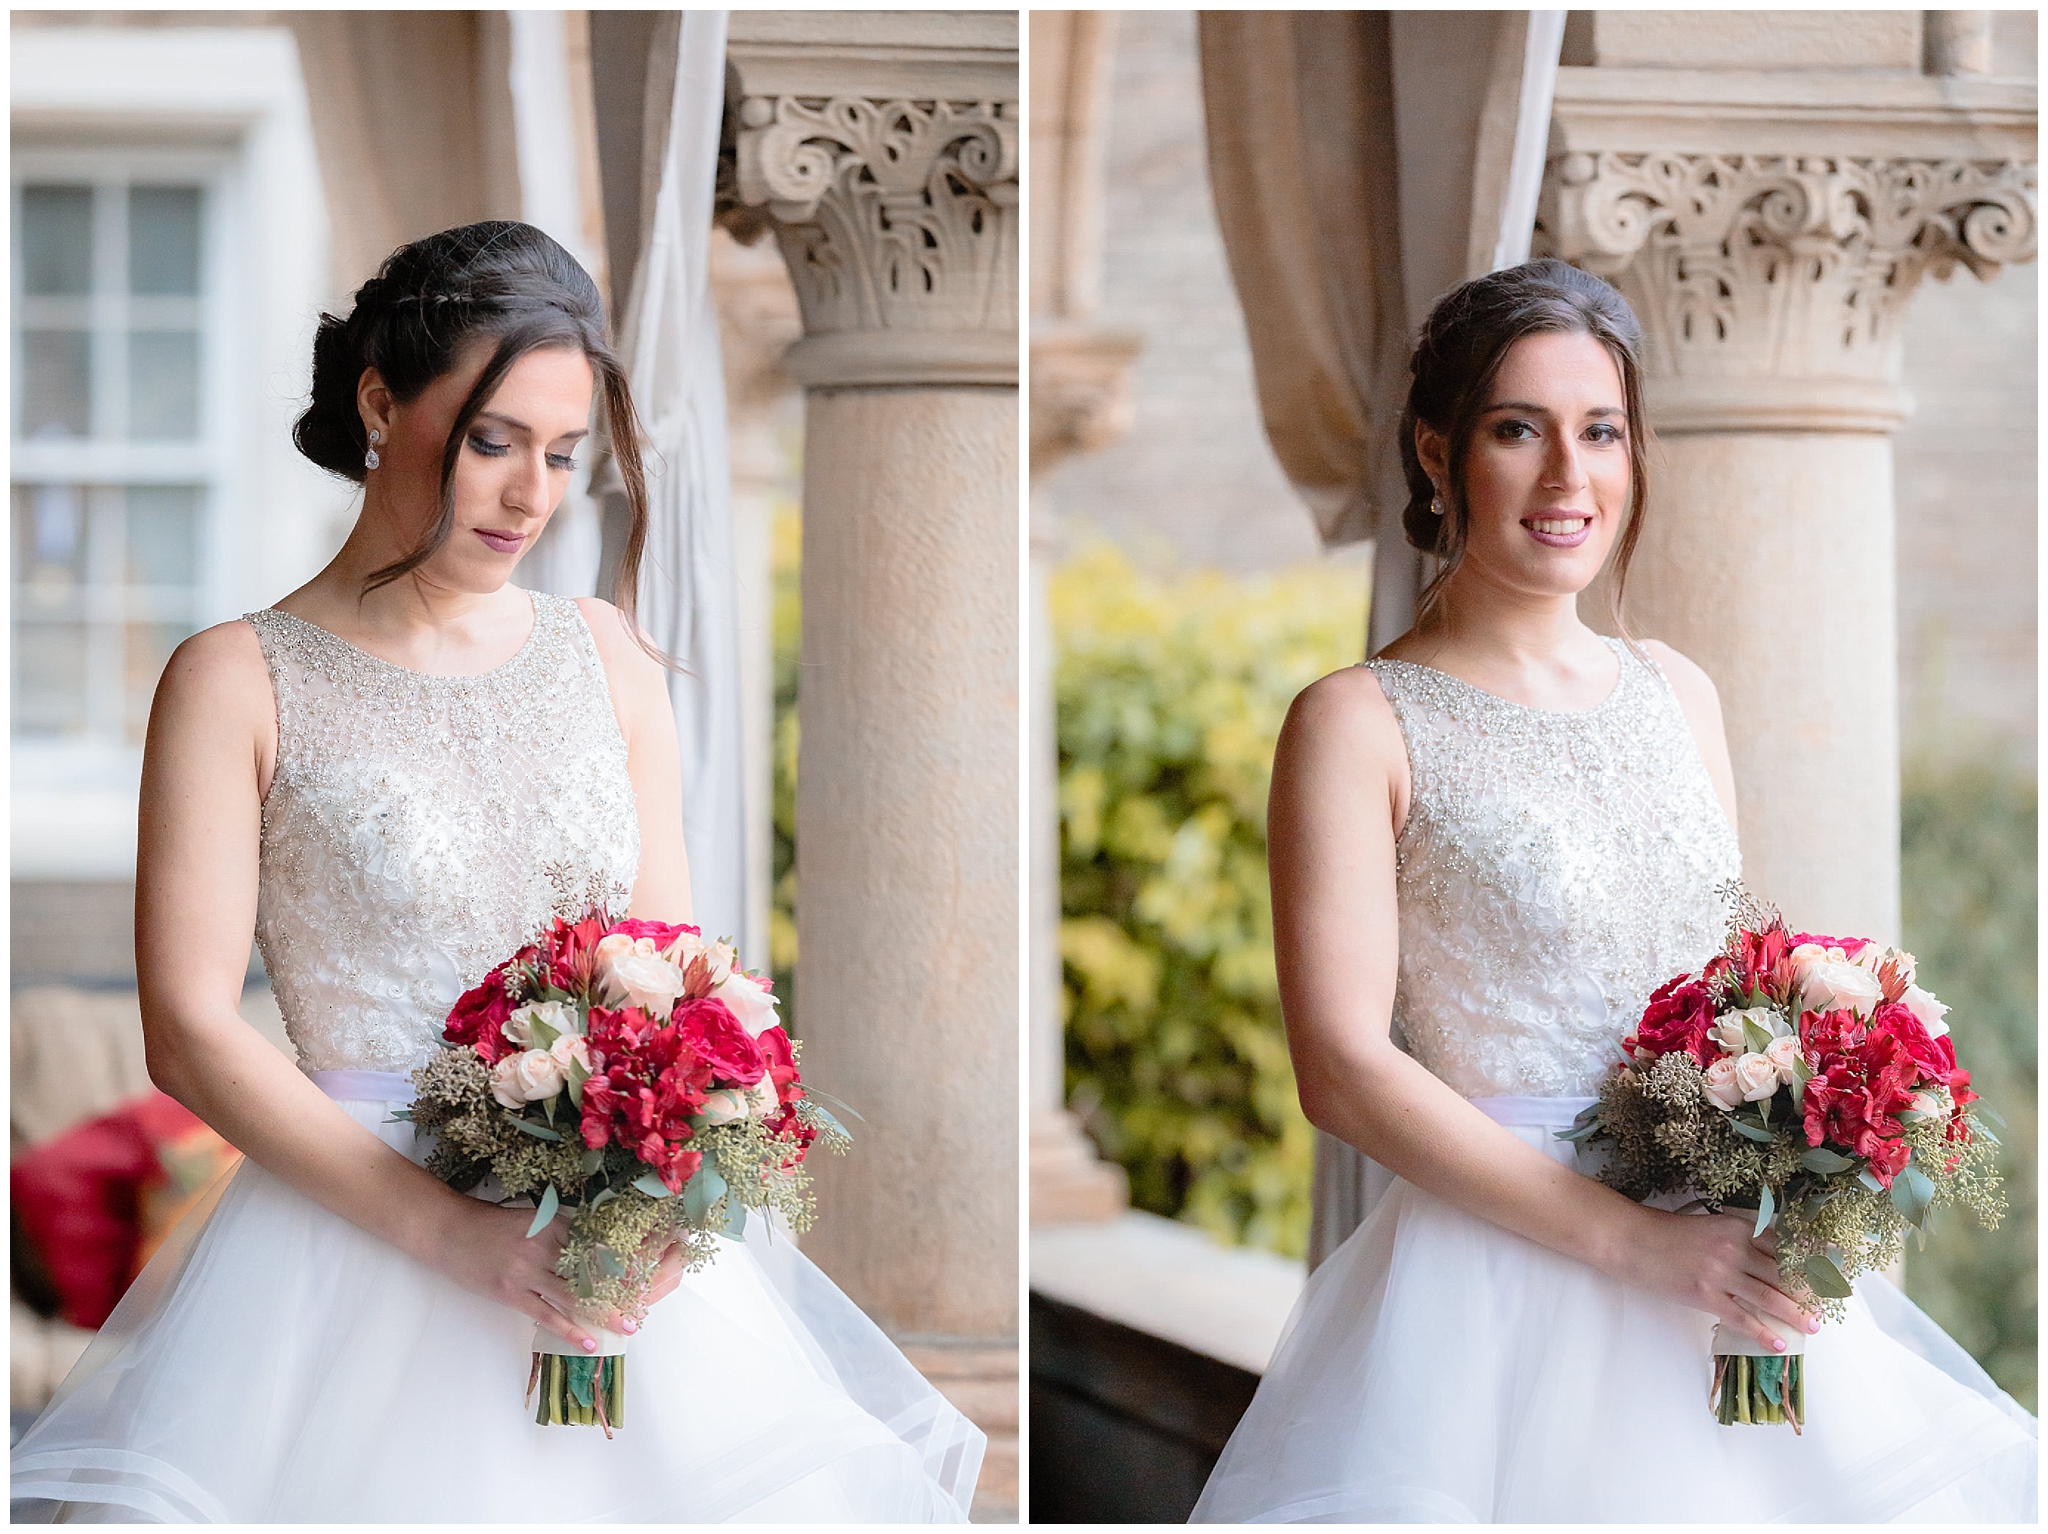 Bridal portraits on Pittsburgh's North Side before a LeMont wedding